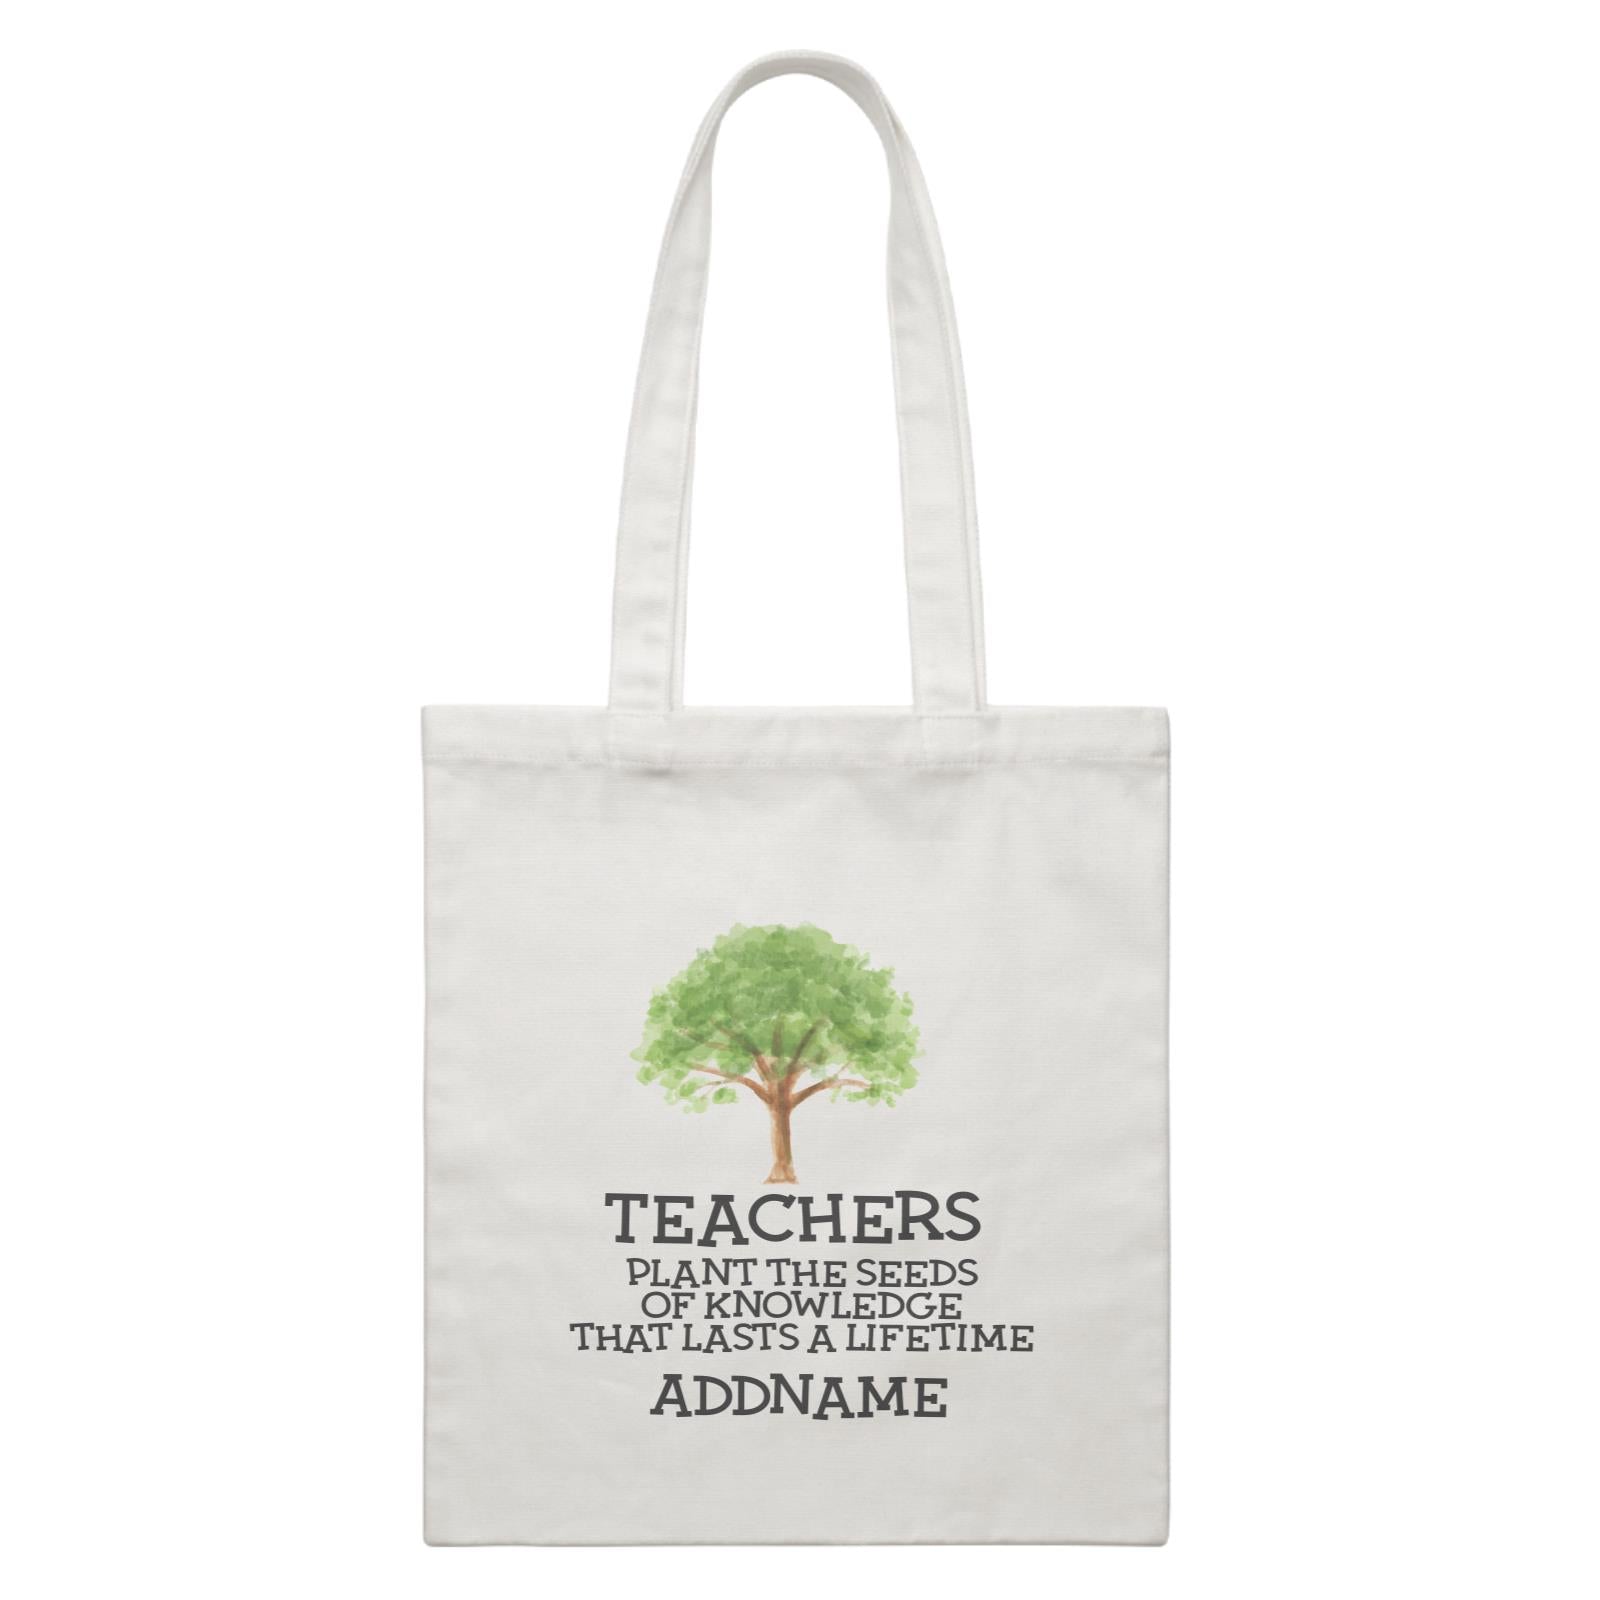 Teacher Quotes 2 Teachers Plant The Seeds Of Knowledge That Lasts A Lifetime Addname White Canvas Bag